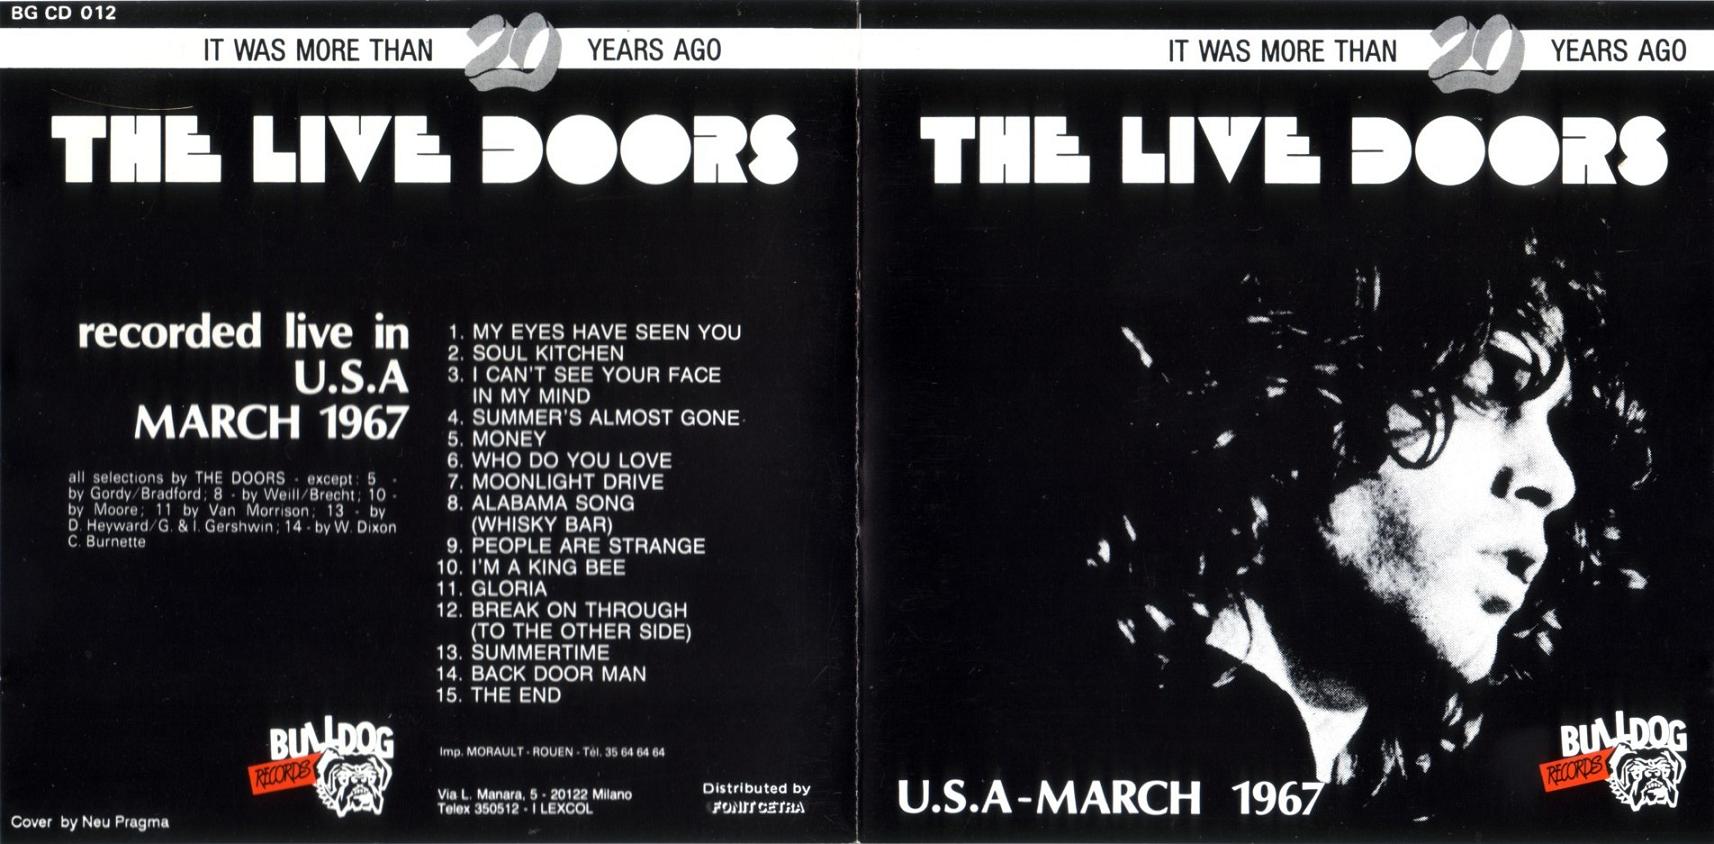 1967-03-10-THE_LIVE_DOORS_U.S.A._MARCH_1967-front